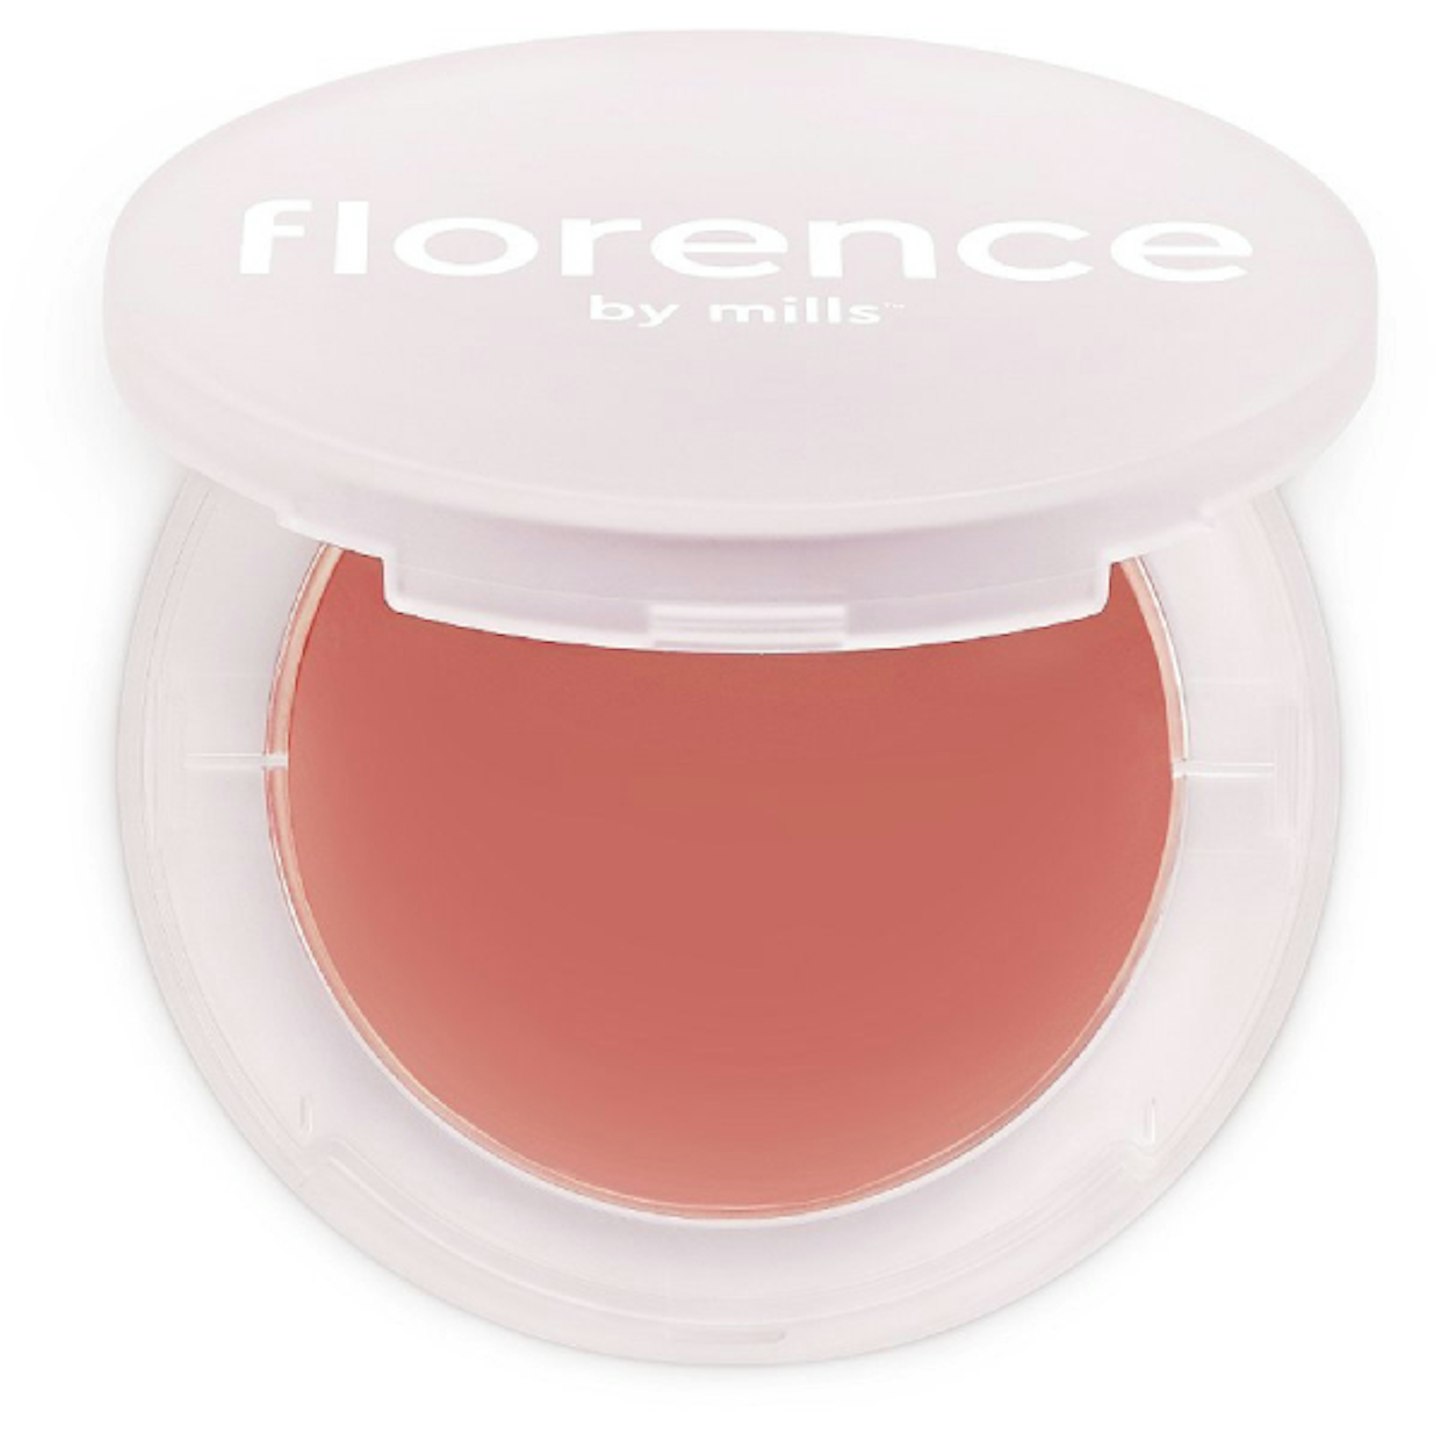 cheek me later cream blush by Florence by Mills